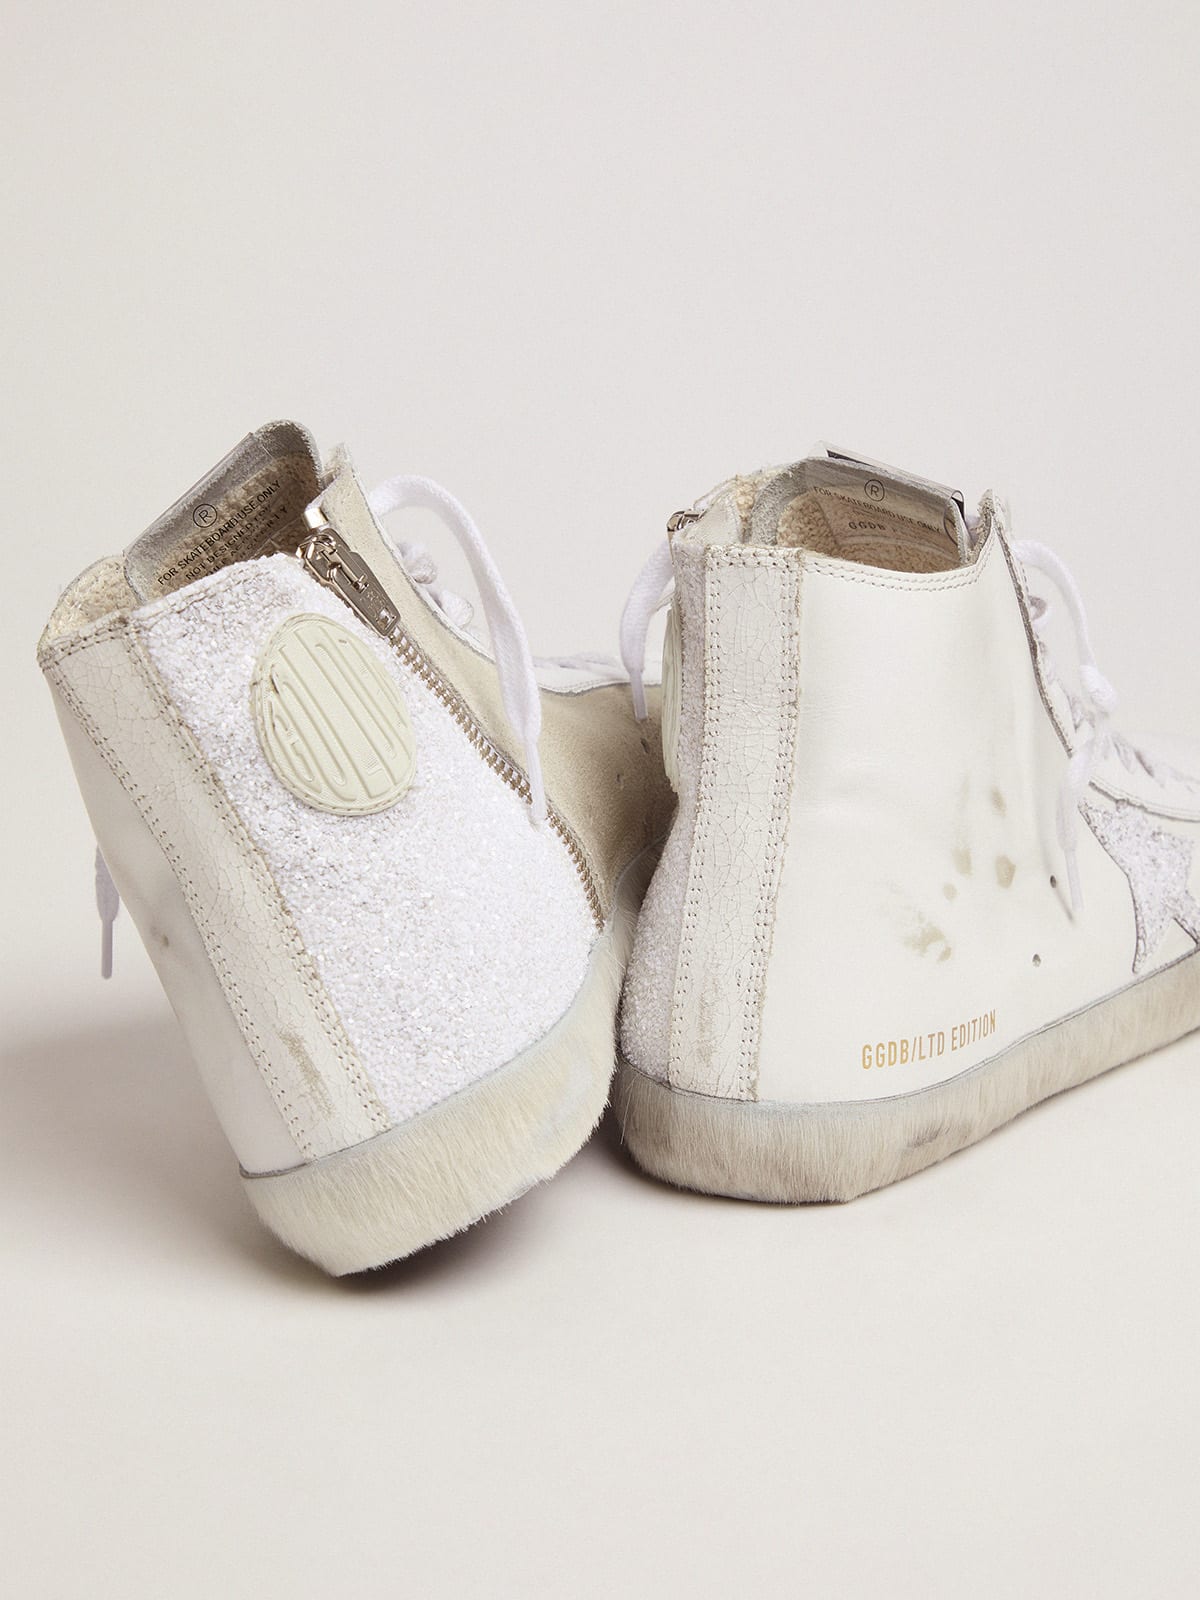 Golden Goose - Men’s LAB Limited Edition white and glitter Francy sneakers in 